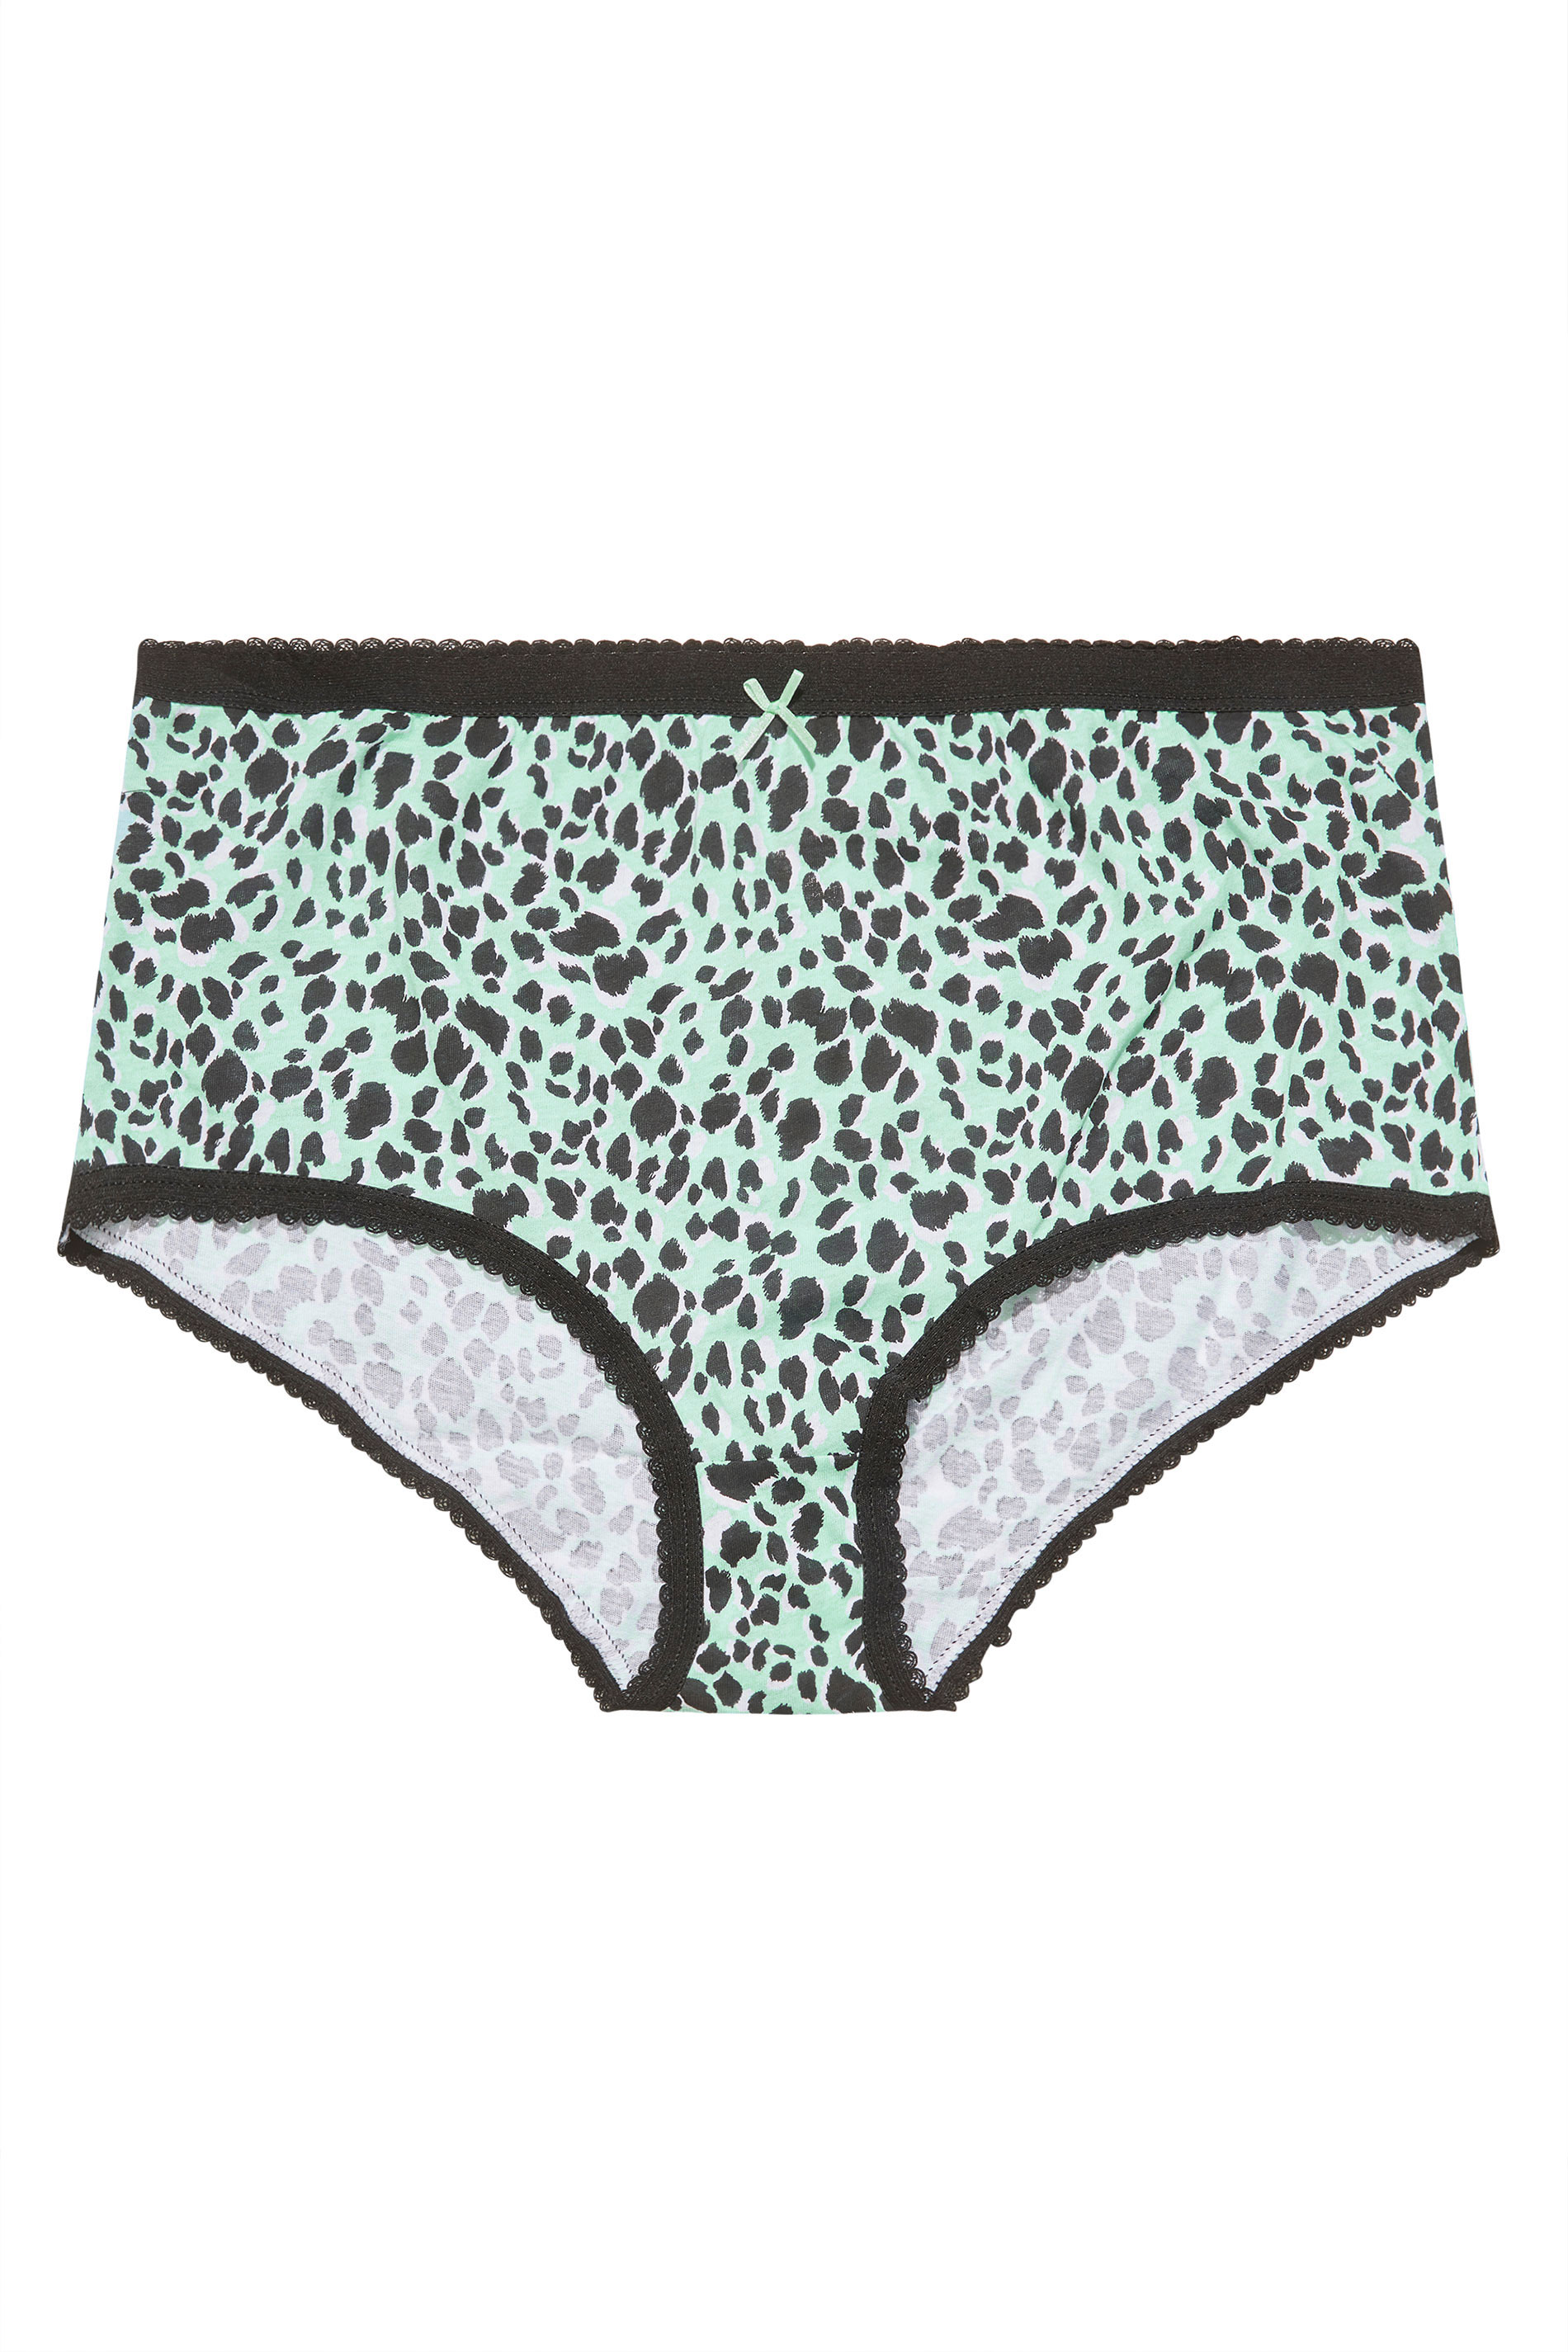 Plus Size 5 PACK Black & Blue Animal Print Full Briefs | Yours Clothing  3